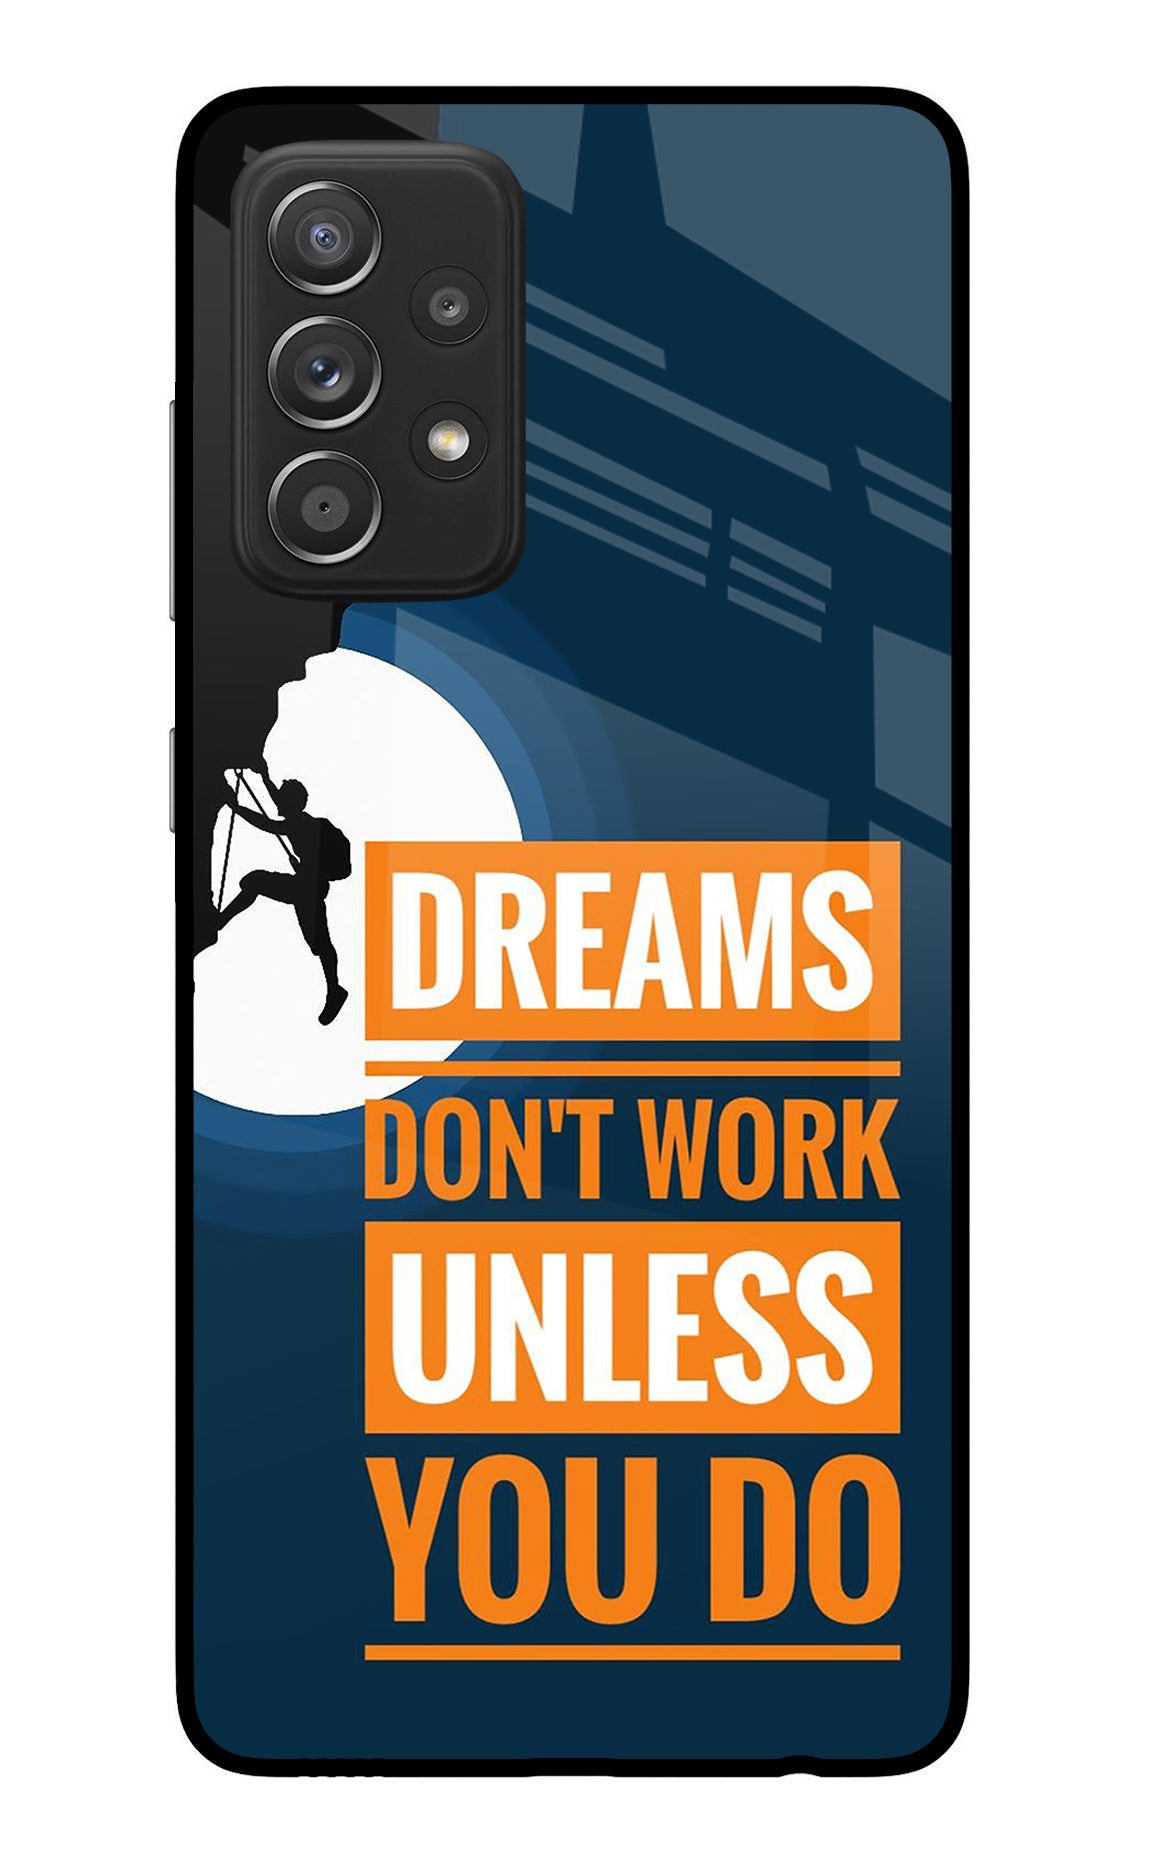 Dreams Don’T Work Unless You Do Samsung A52/A52s 5G Back Cover